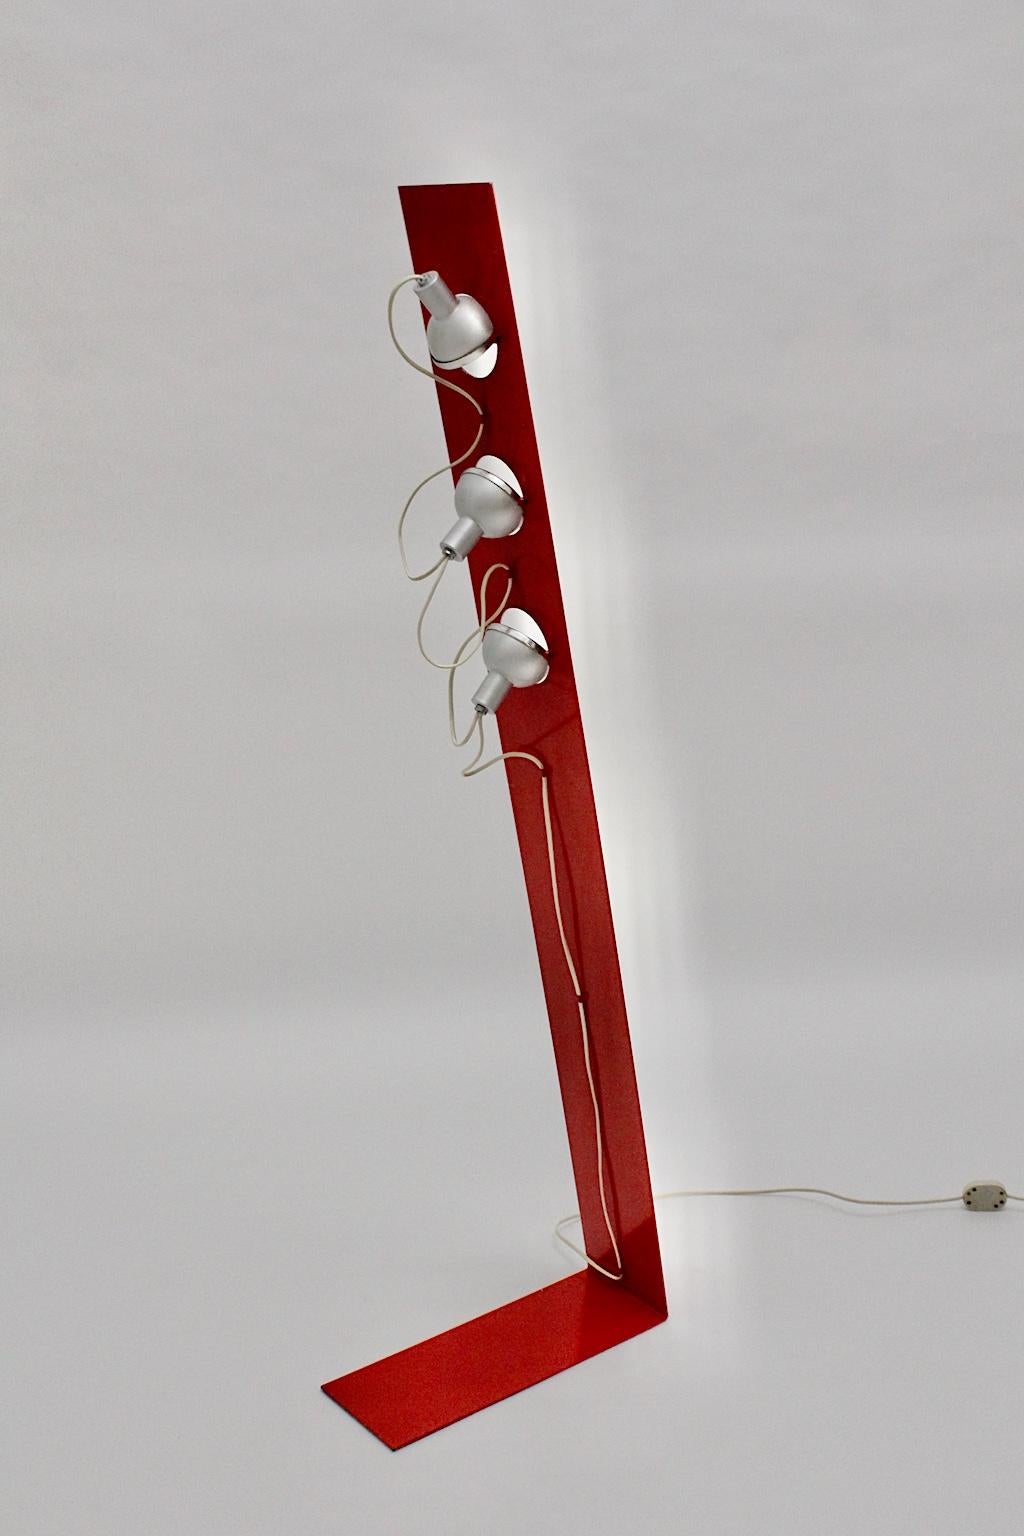 Mid-20th Century Space Age Vintage Red Metal Floor Lamp, Italy, 1960s For Sale